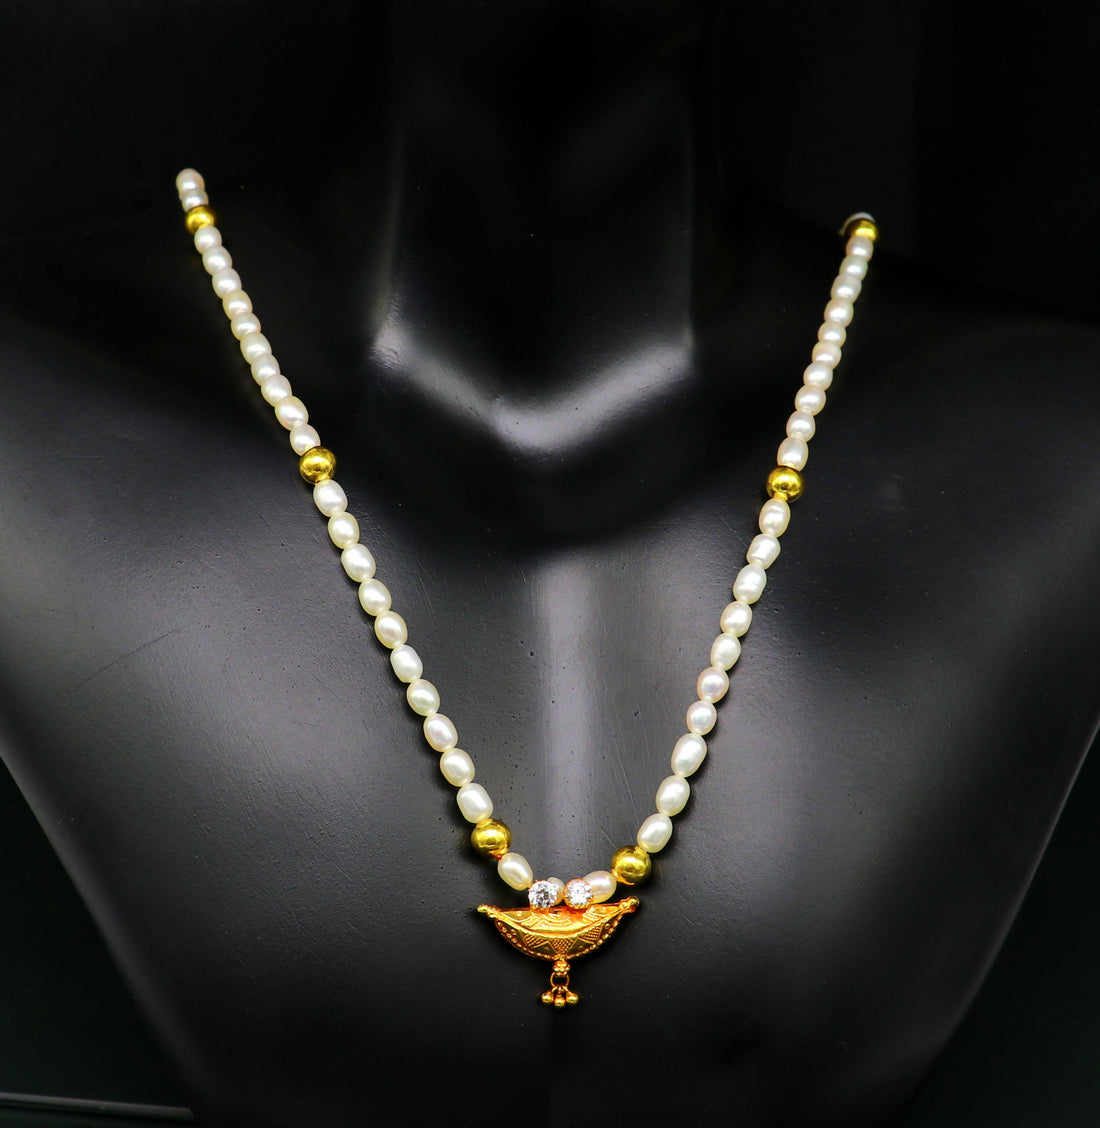 18" peals beaded with 6 gold beads necklace, fabulous 20kt yellow gold amulet style pendant, excellent customize gift stylish jewelry ap04 - TRIBAL ORNAMENTS